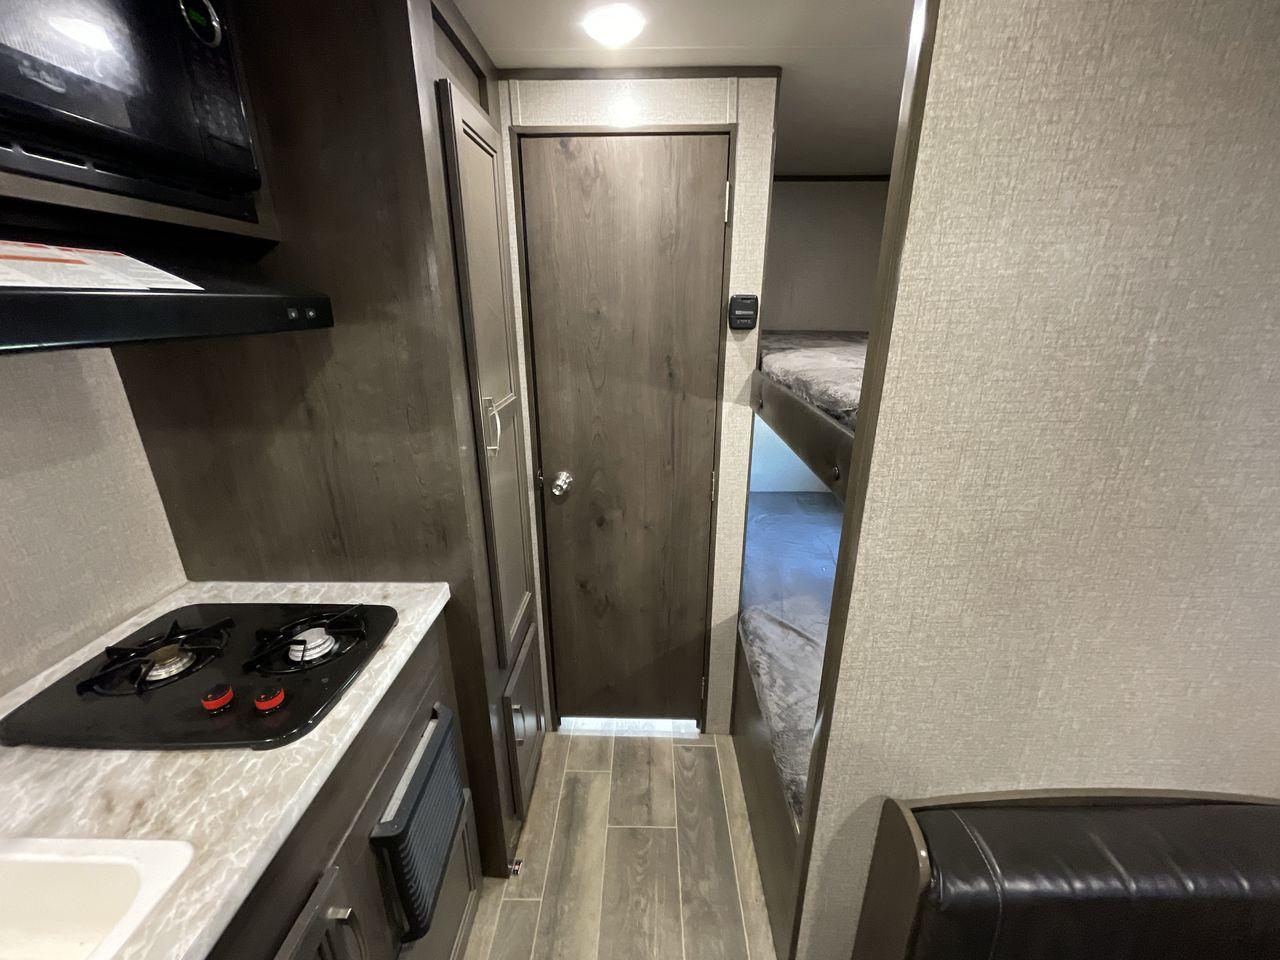 2021 JAYCO JAY FLIGHT SLX 174BH (1UJBJ0AJ1M1) , Length: 21.67 ft | Dry Weight: 3,075 lbs | GVWR: 3,950 lbs | Slides: 0 transmission, located at 4319 N Main Street, Cleburne, TX, 76033, (817) 221-0660, 32.435829, -97.384178 - Take the 2021 Jayco Jay Flight SLX 174BH travel trailer out on your camping adventures. This lightweight and small RV is ideal for people looking for an affordable and cozy way to enjoy the great outdoors. The dimensions of this unit are 21.67 ft in length, 7.08 ft in width, and 9.17 ft in height. I - Photo #14